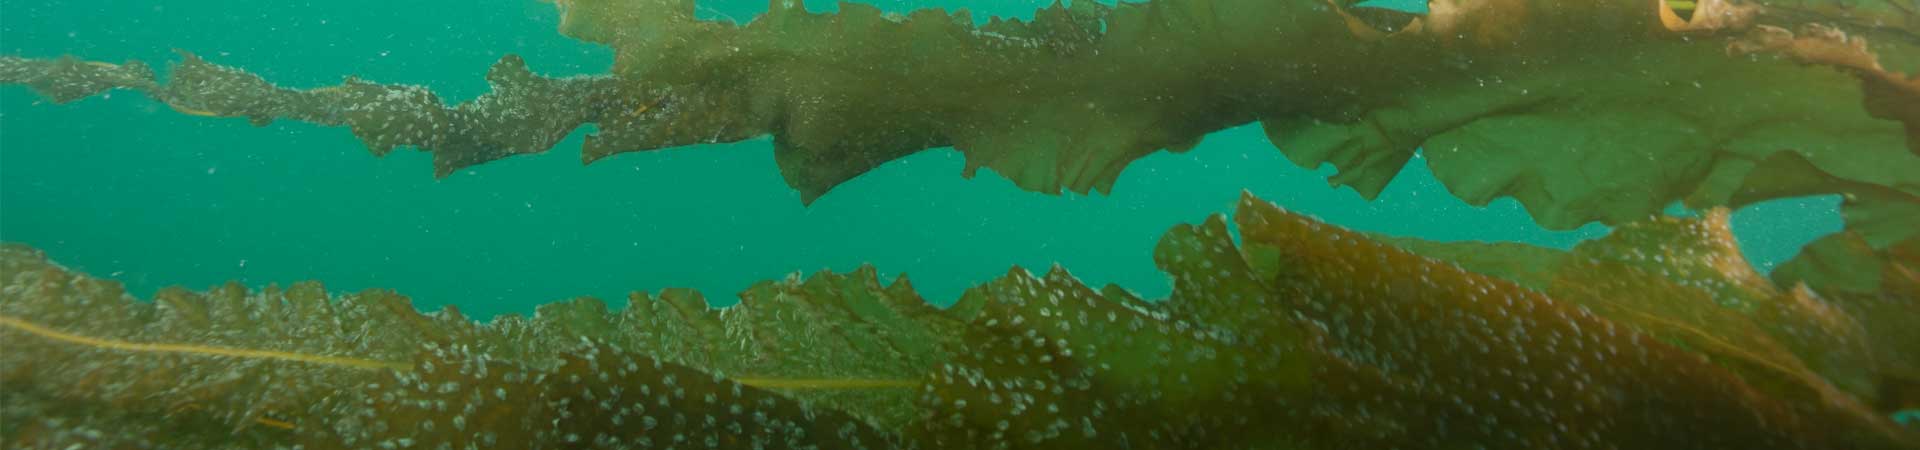 diver photo showing the seaweed farm below water surface